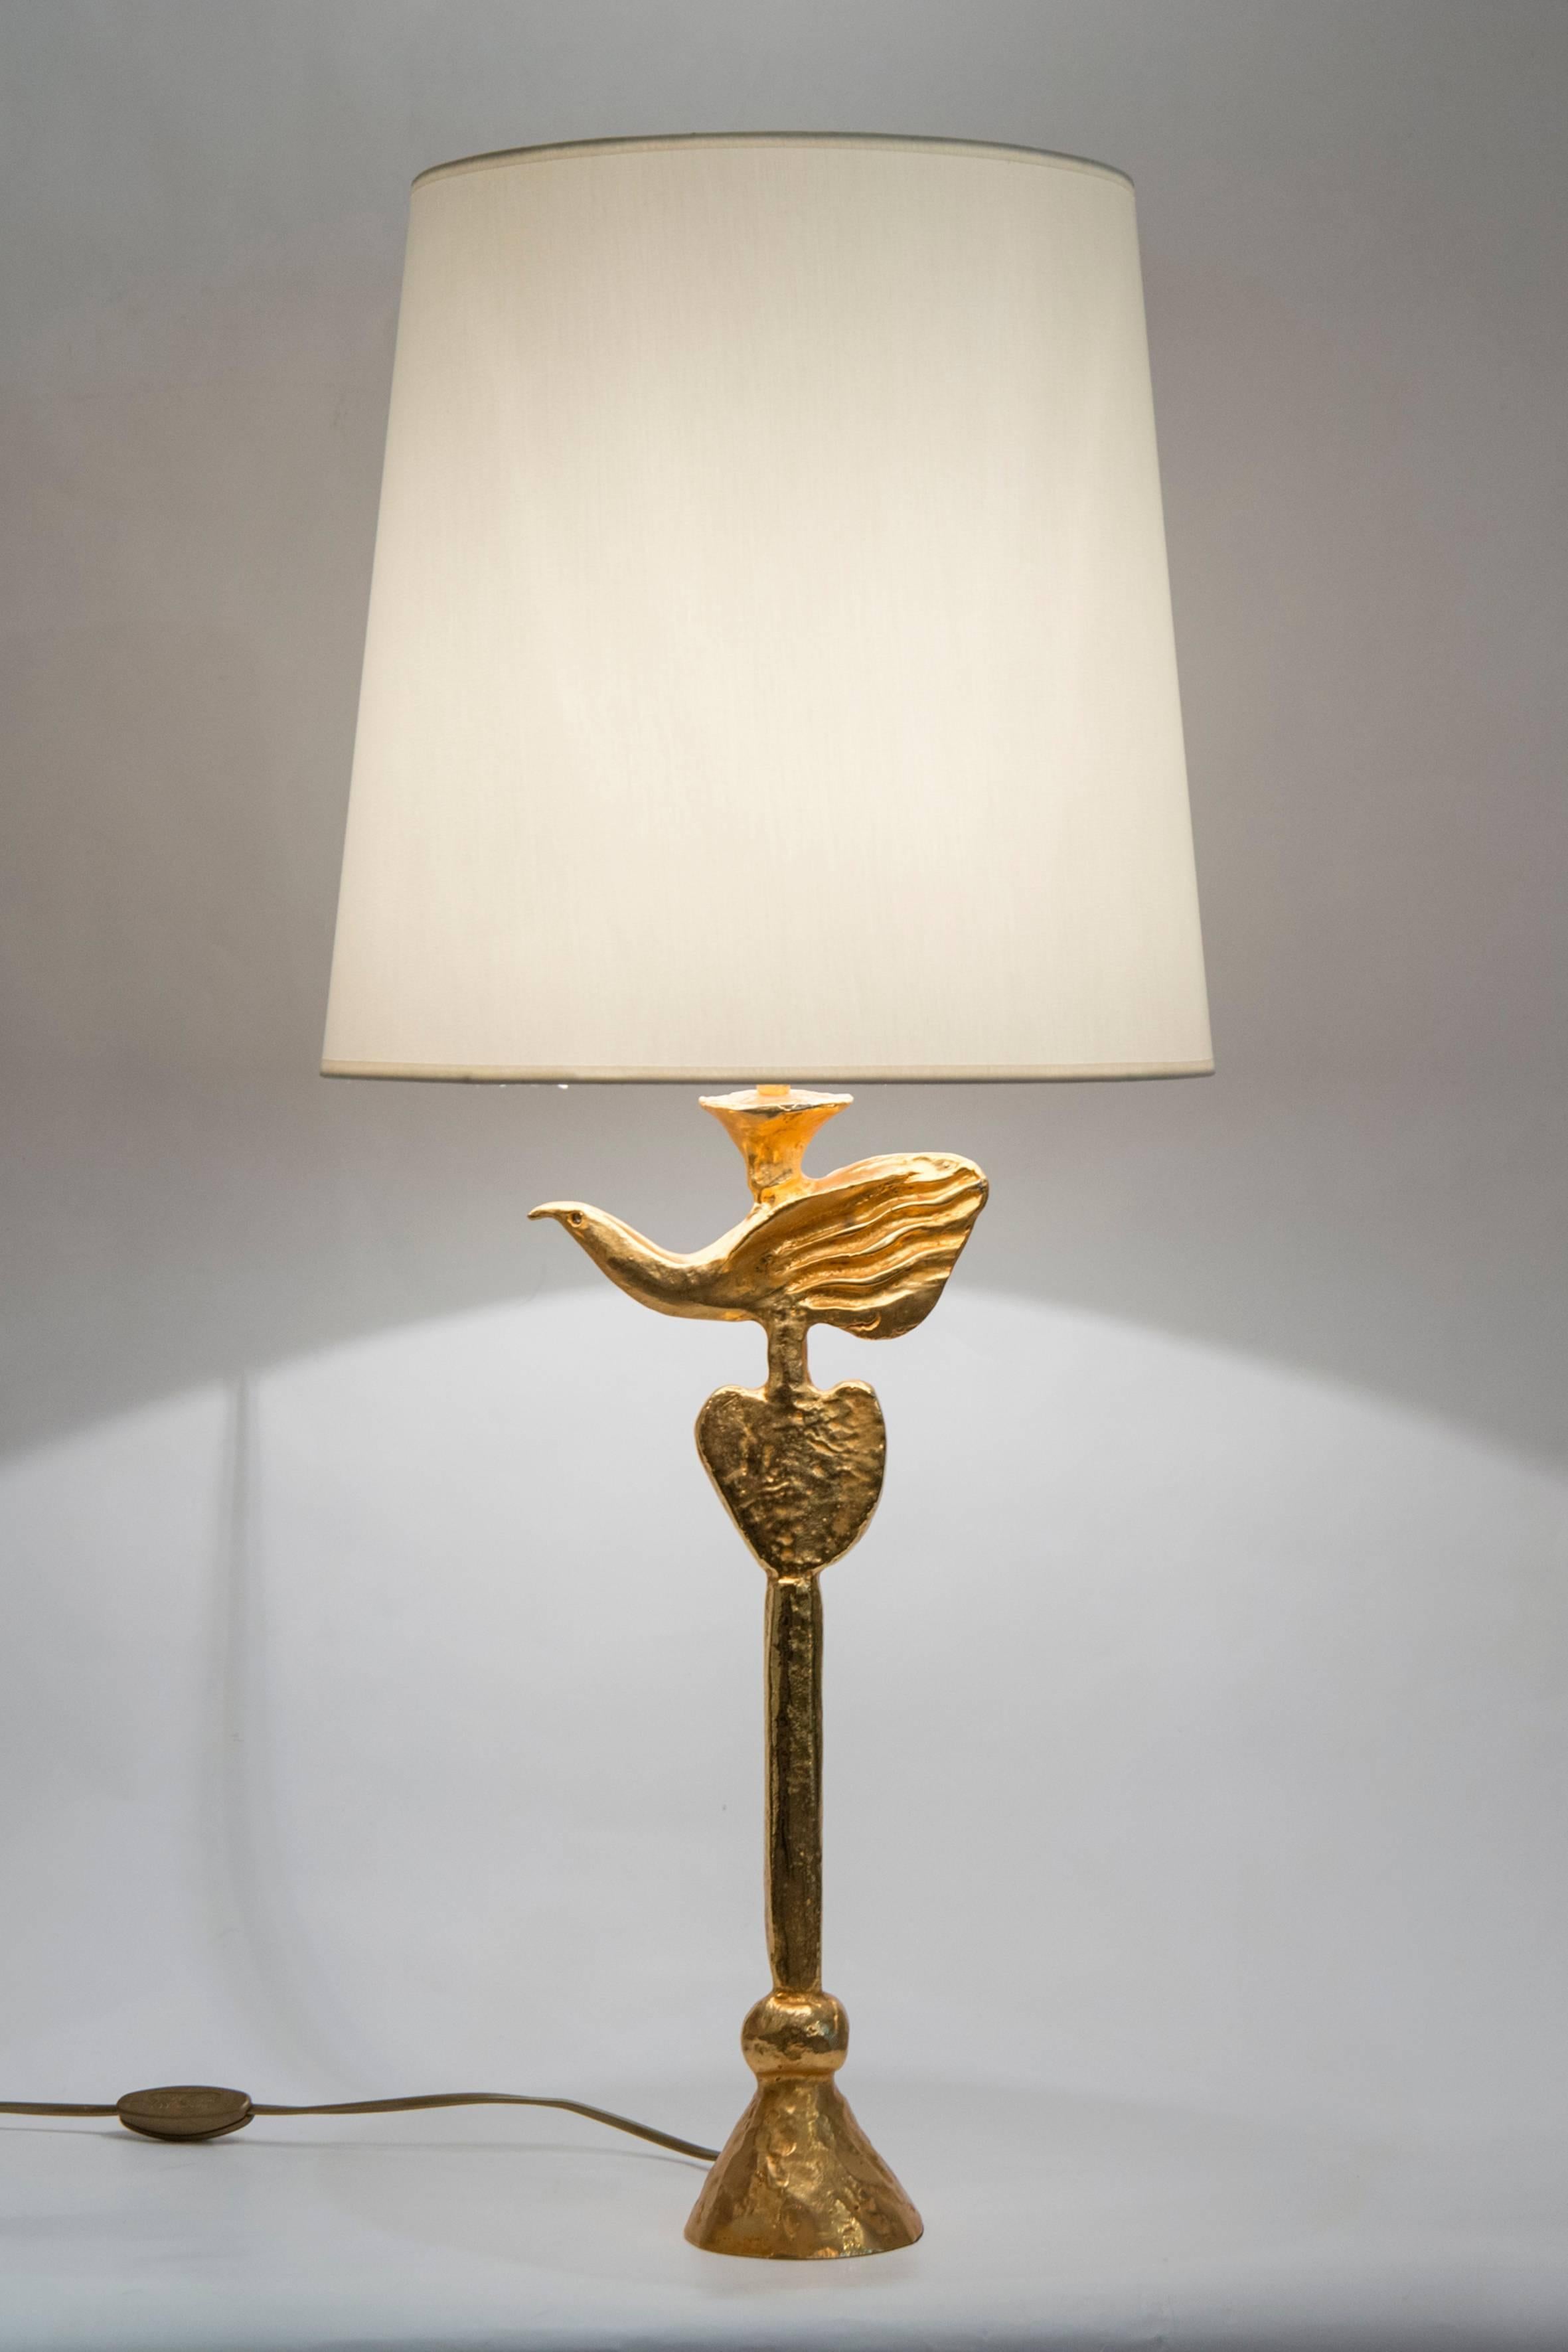 French Gilded Bronze Table Lamp by Pierre Casenove, Edited by Fondica